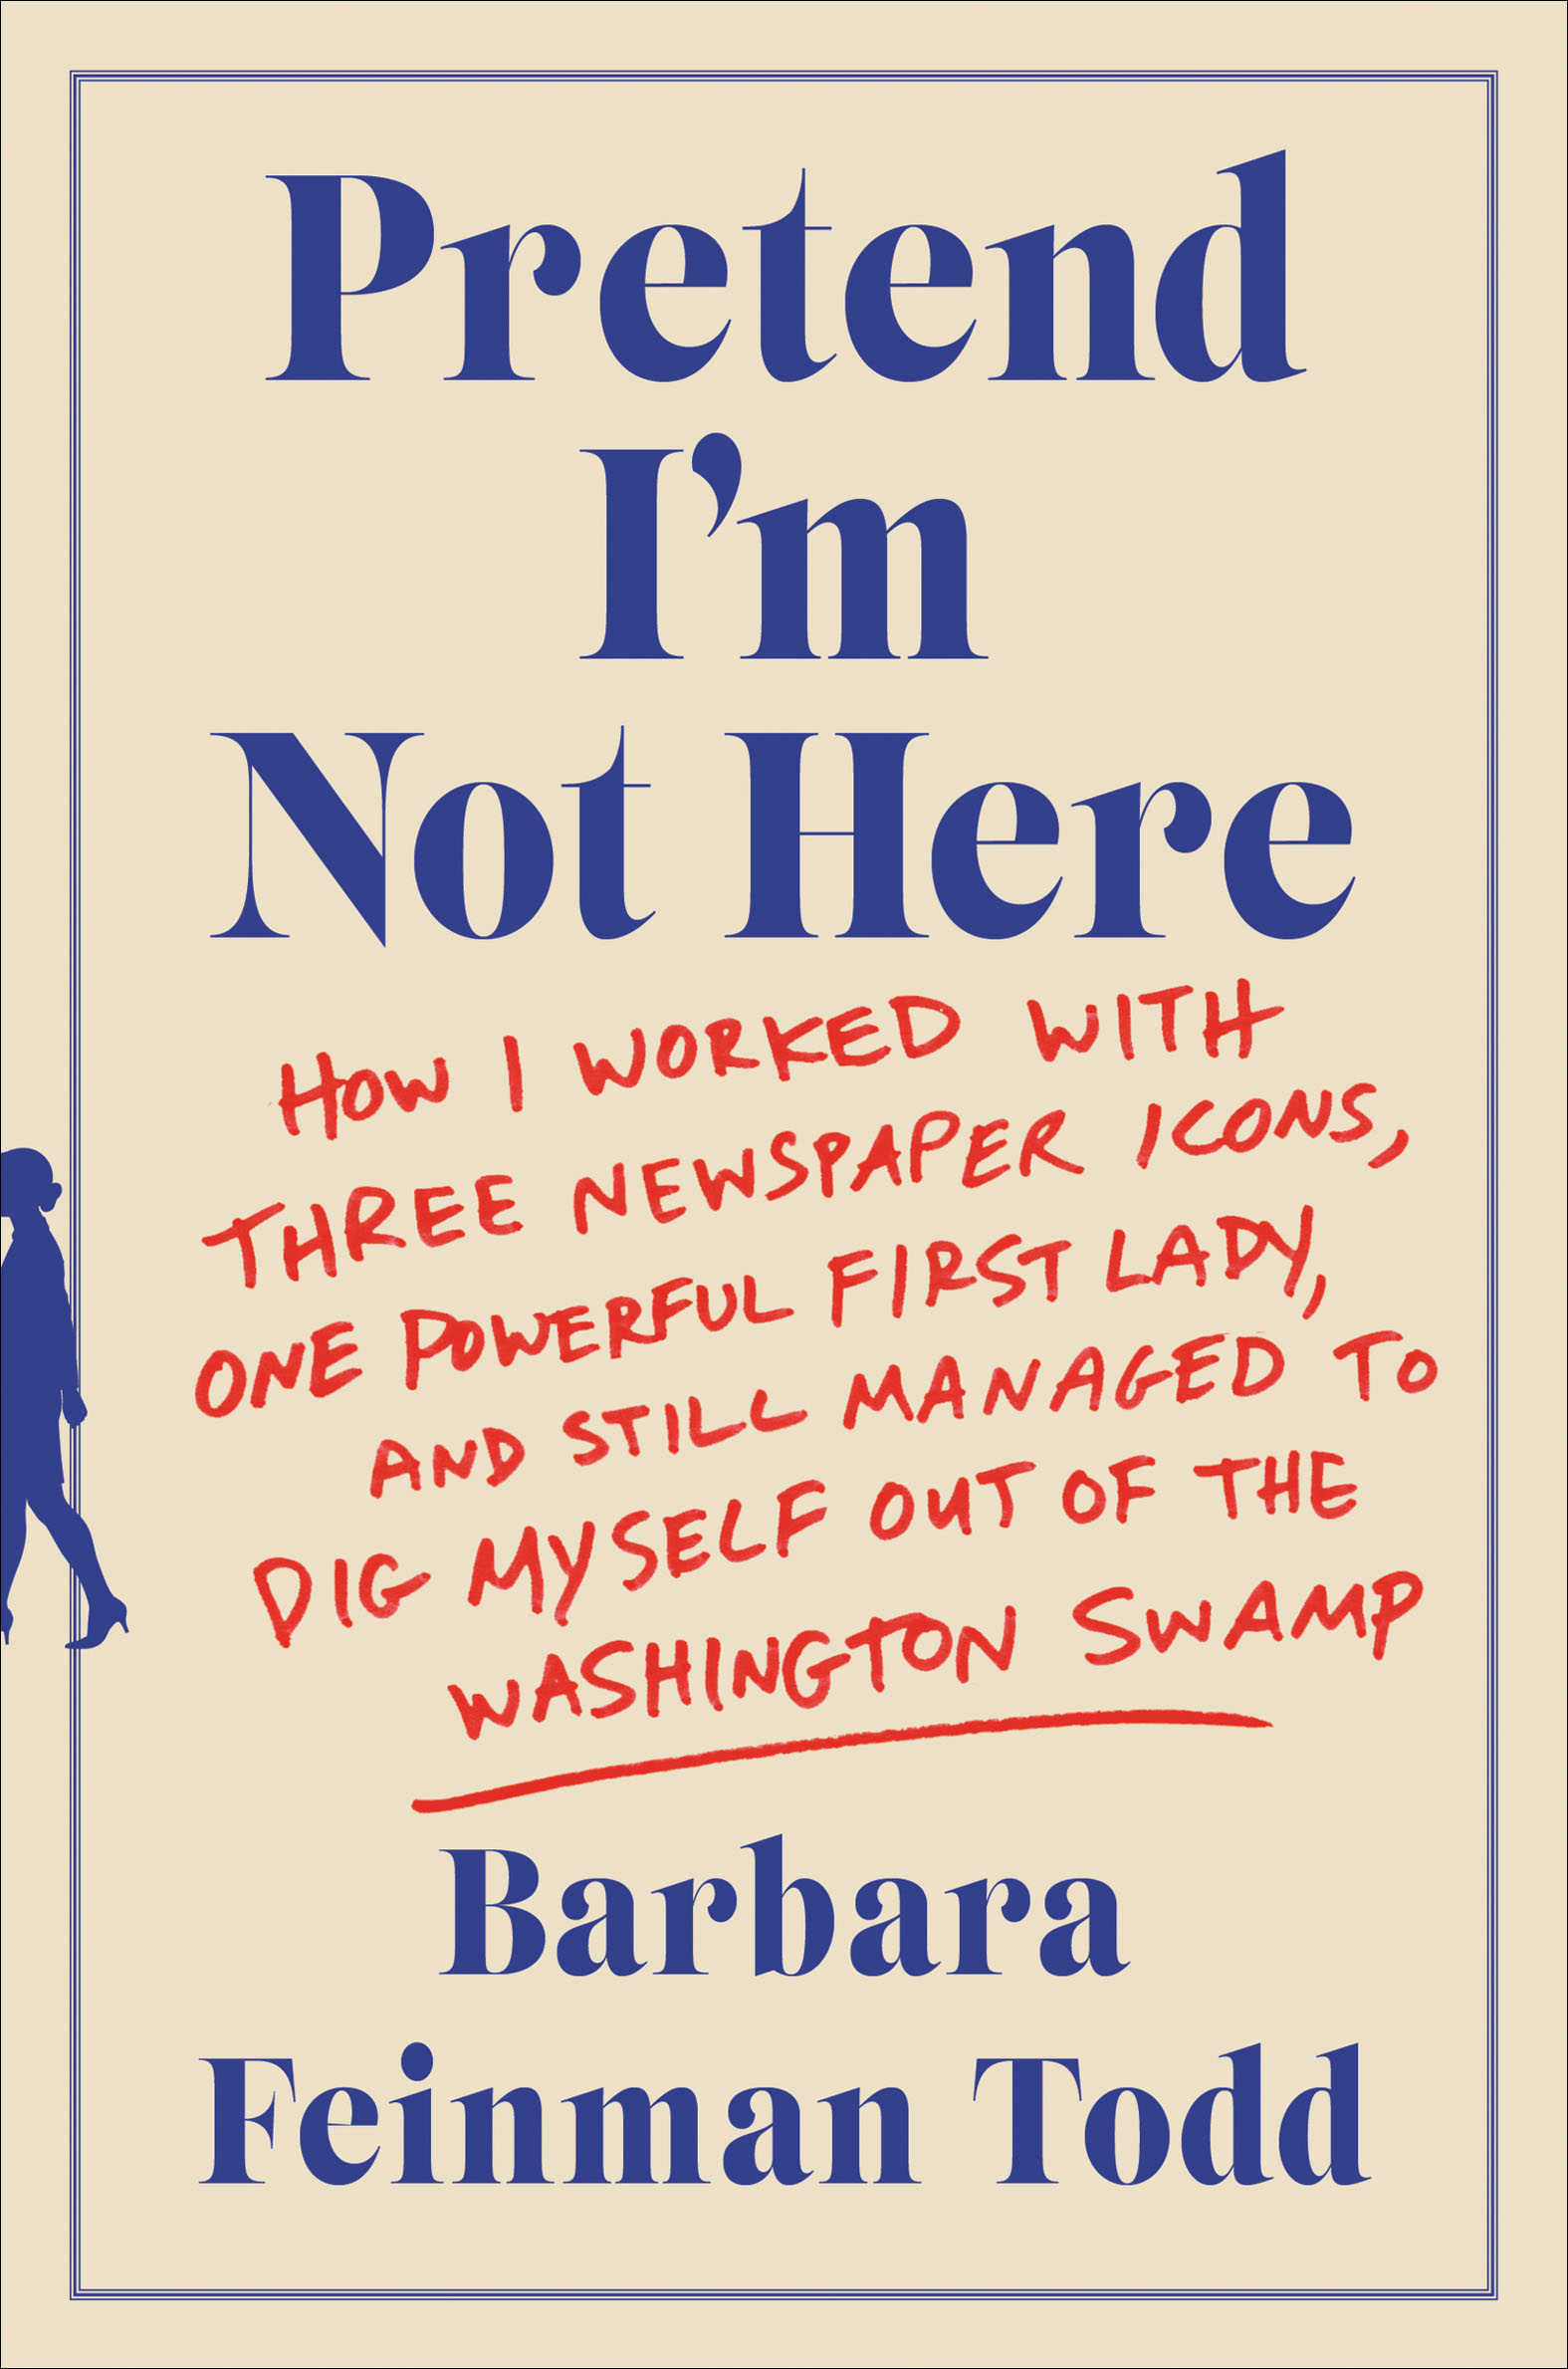 Cover image for Pretend I'm Not Here [electronic resource] : How I Worked with Three Newspaper Icons, One Powerful First Lady, and Still Managed to Dig Myself Out of the Washington Swamp